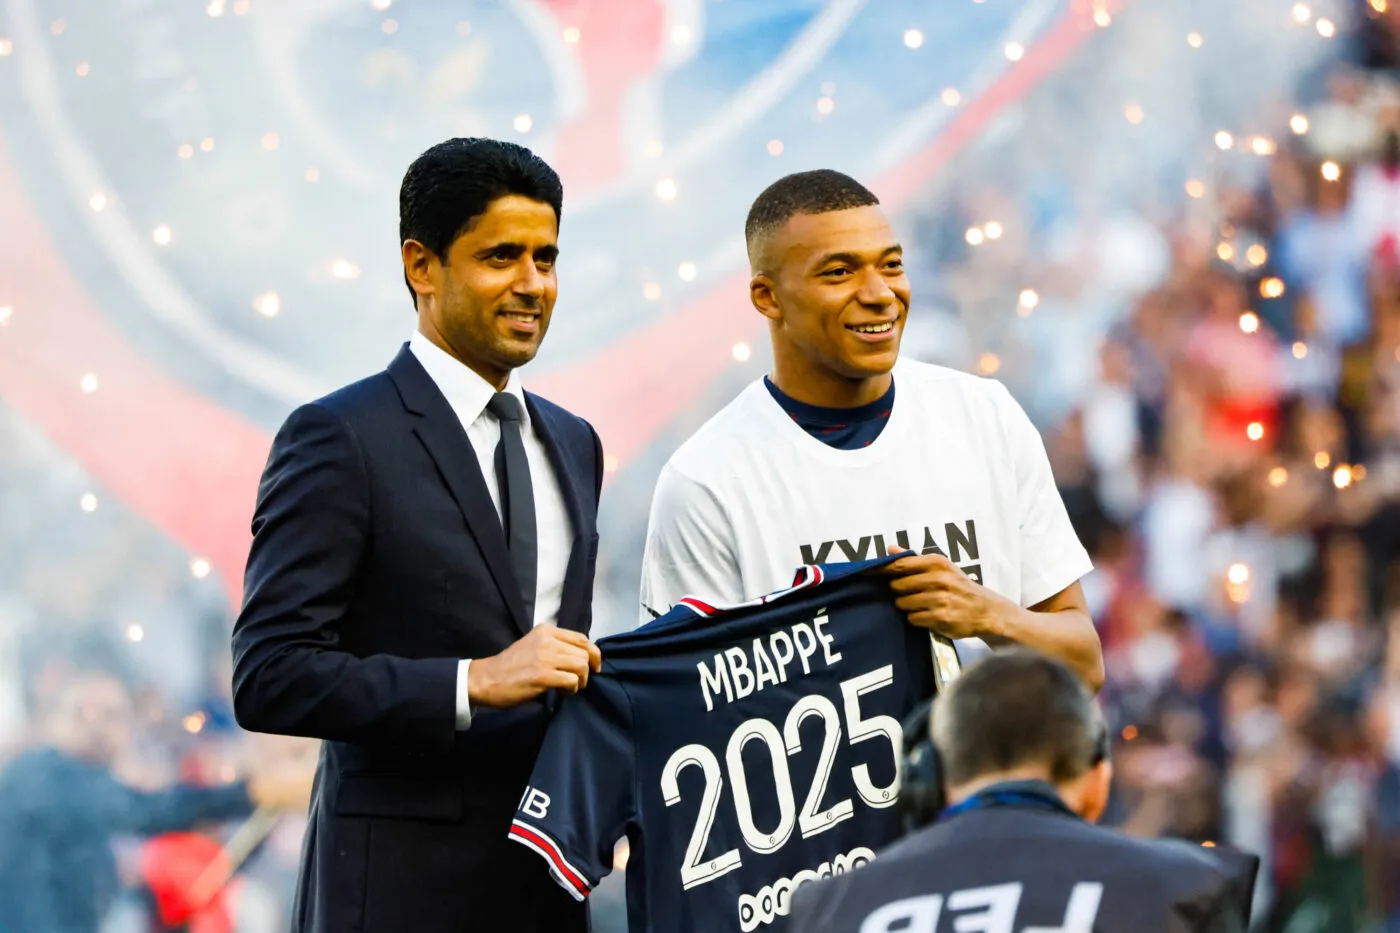 Paris Saint-Germain's French forward Kylian Mbappe (R) poses with PSG president Nasser Al-Khelaifi after the announcement Kylian Mbappe staying at PSG until 2025, before the French L1 football match between Paris Saint-Germain (PSG) and Metz at the Parc des Princes stadium in Paris on May 21, 2022. Photo by Rit Heise/Xinhua/ABACAPRESSS.COM   - Photo by Icon sport